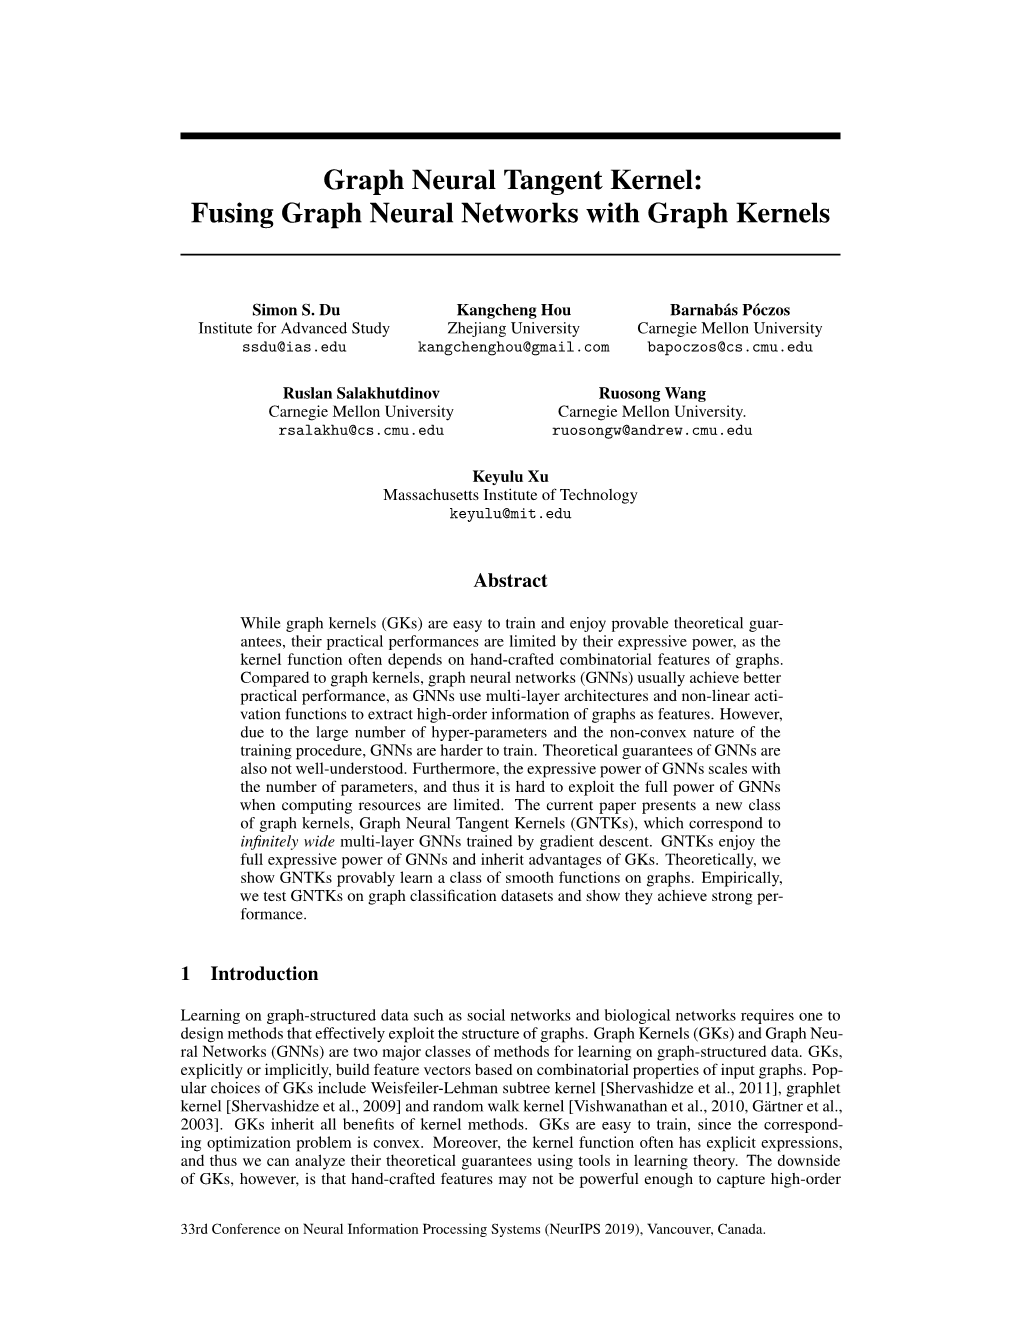 Graph Neural Tangent Kernel: Fusing Graph Neural Networks with Graph Kernels